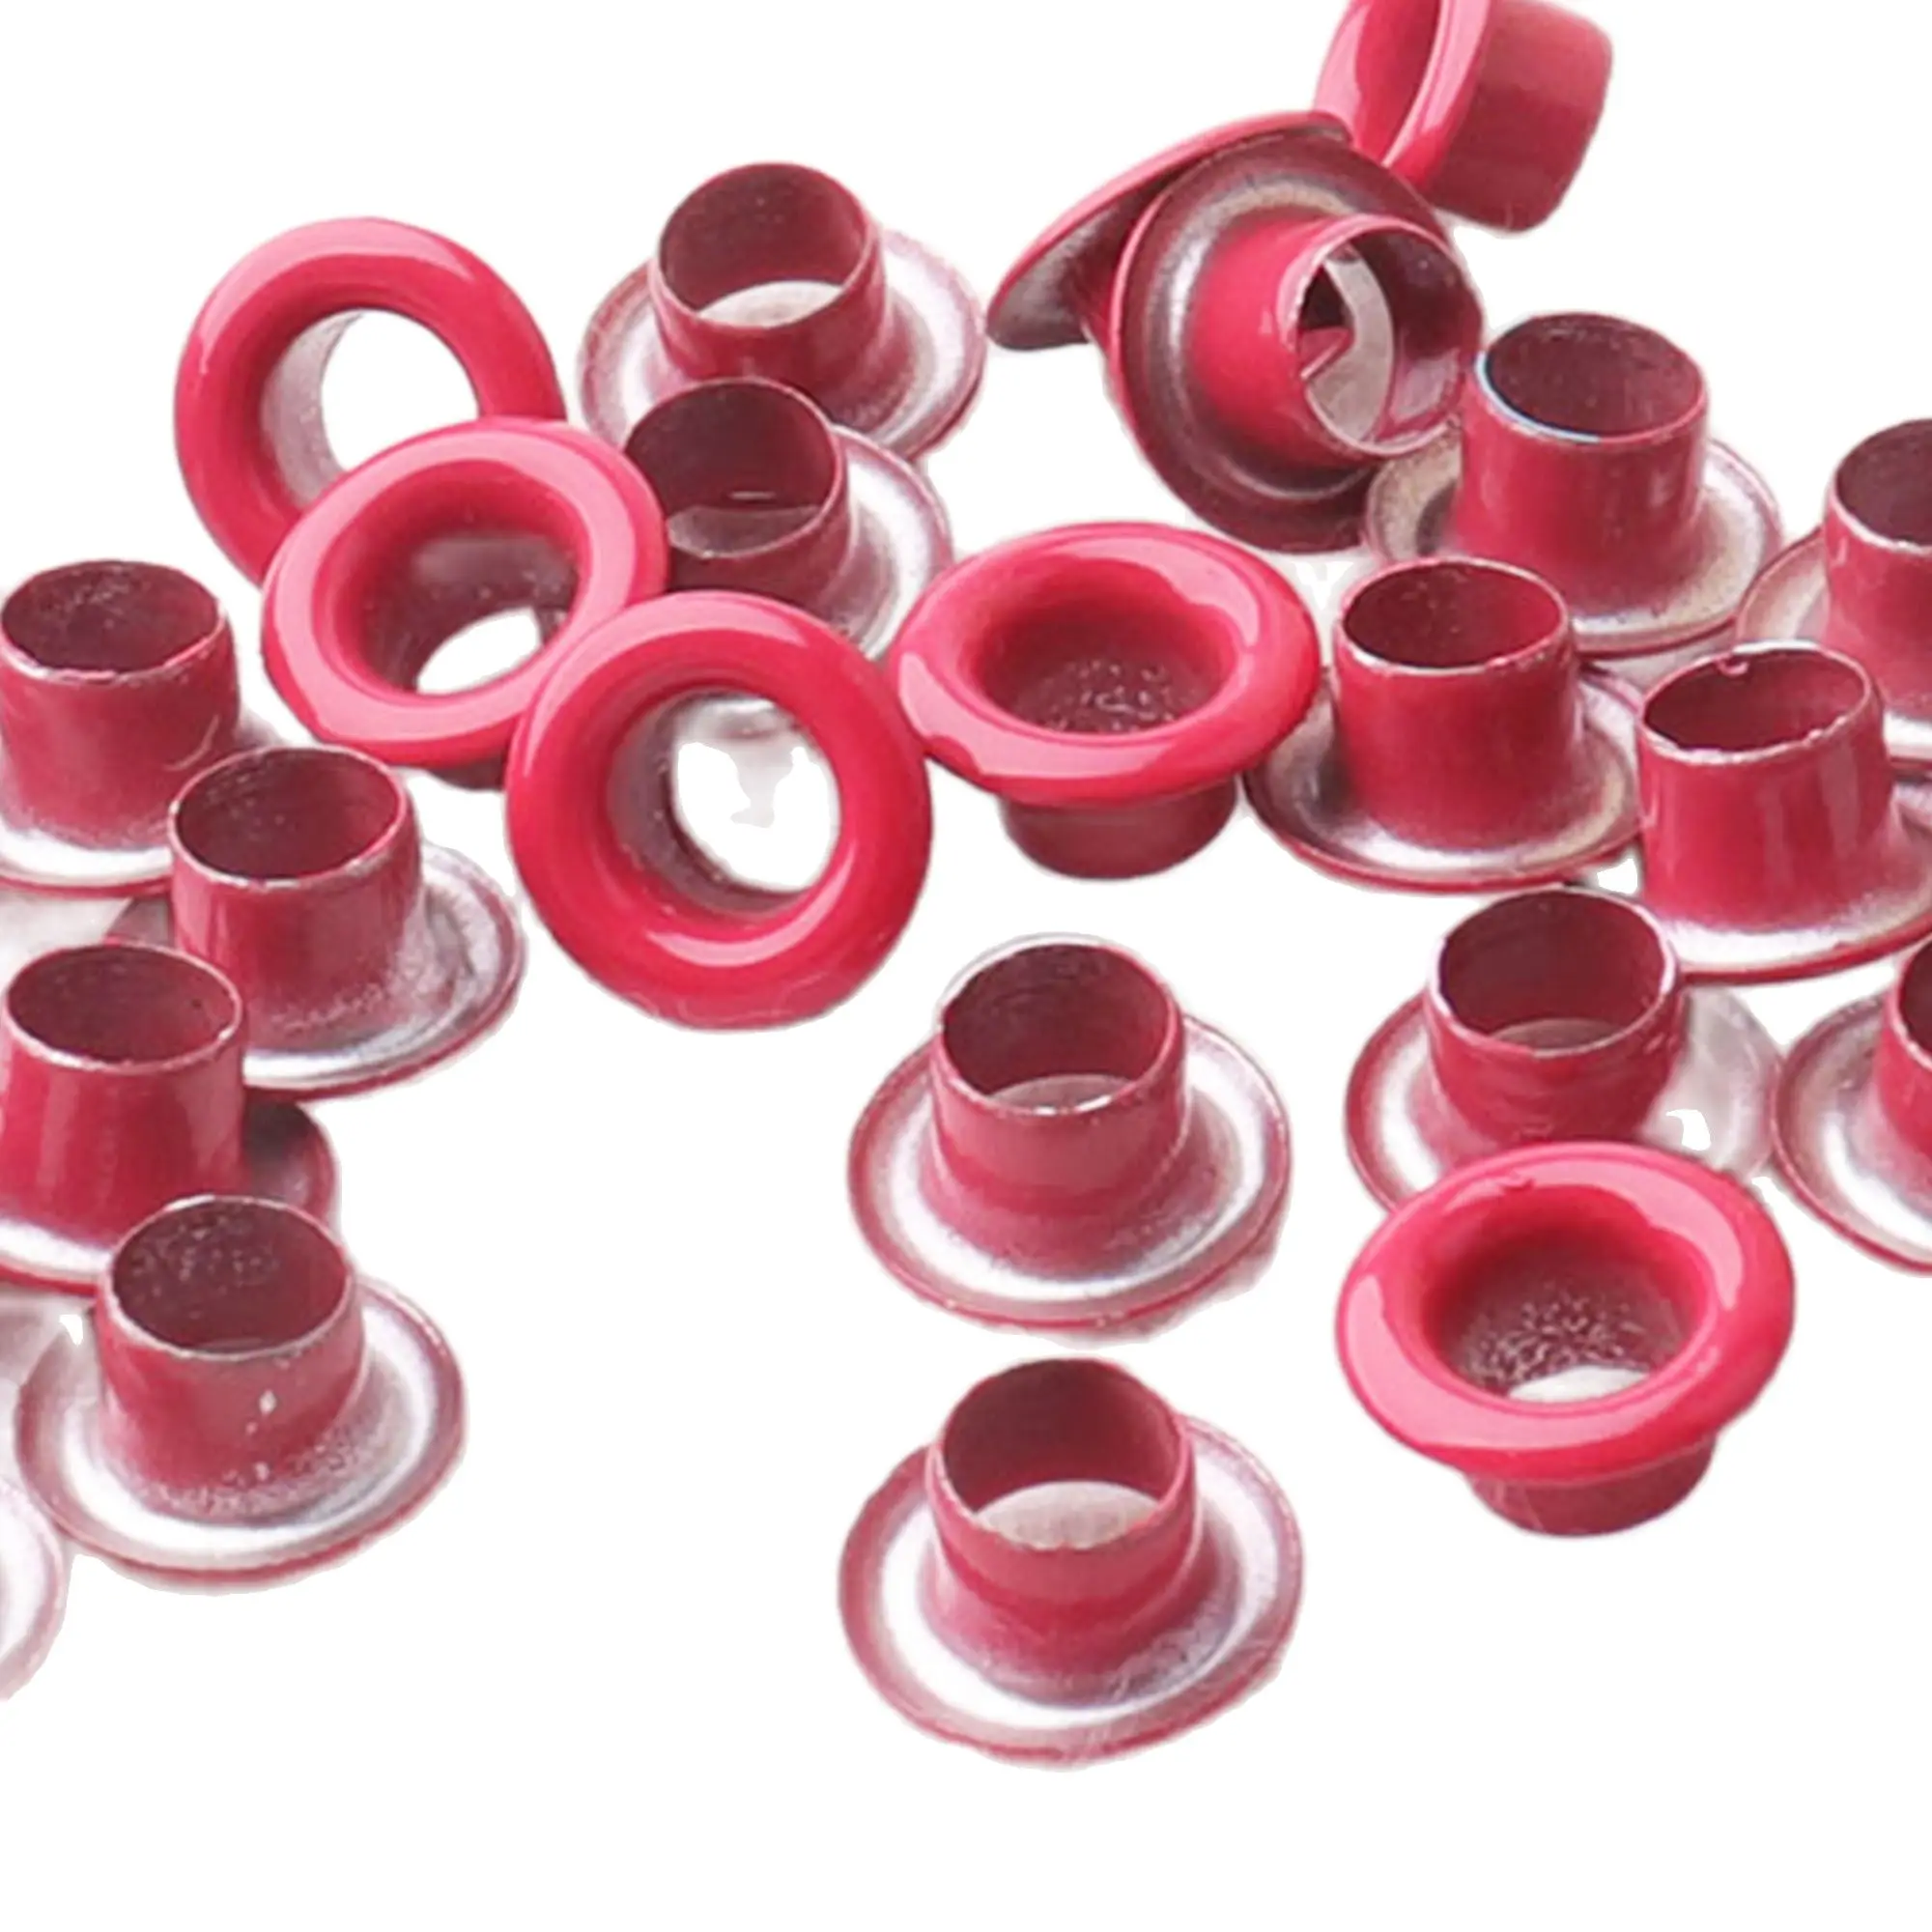 

100 pcs Red Metal Eyelets Grommets With Washers Eyelets Great for Clothes Leather Canvas bag Shoe eyes-1/8"(3mm)